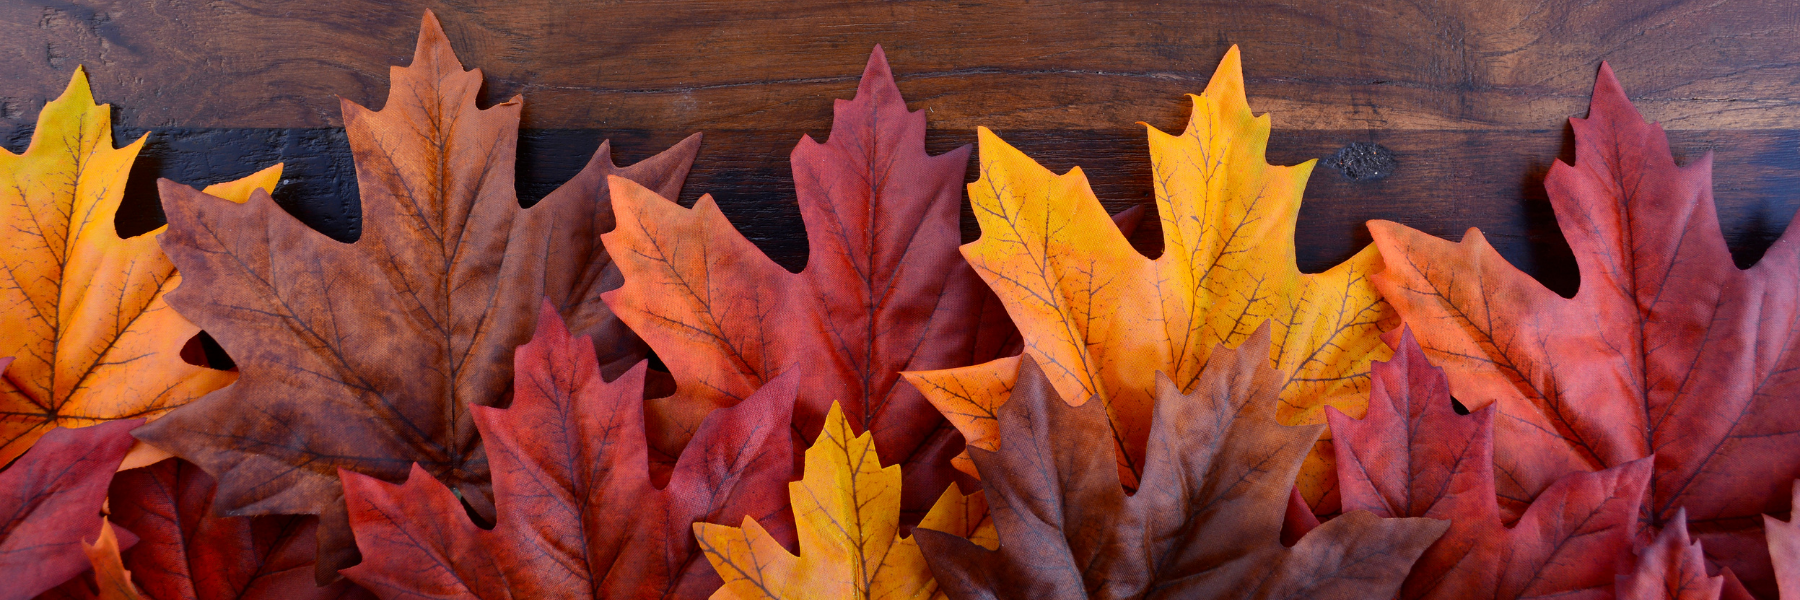 Vibrant fall leaves against a wood background 